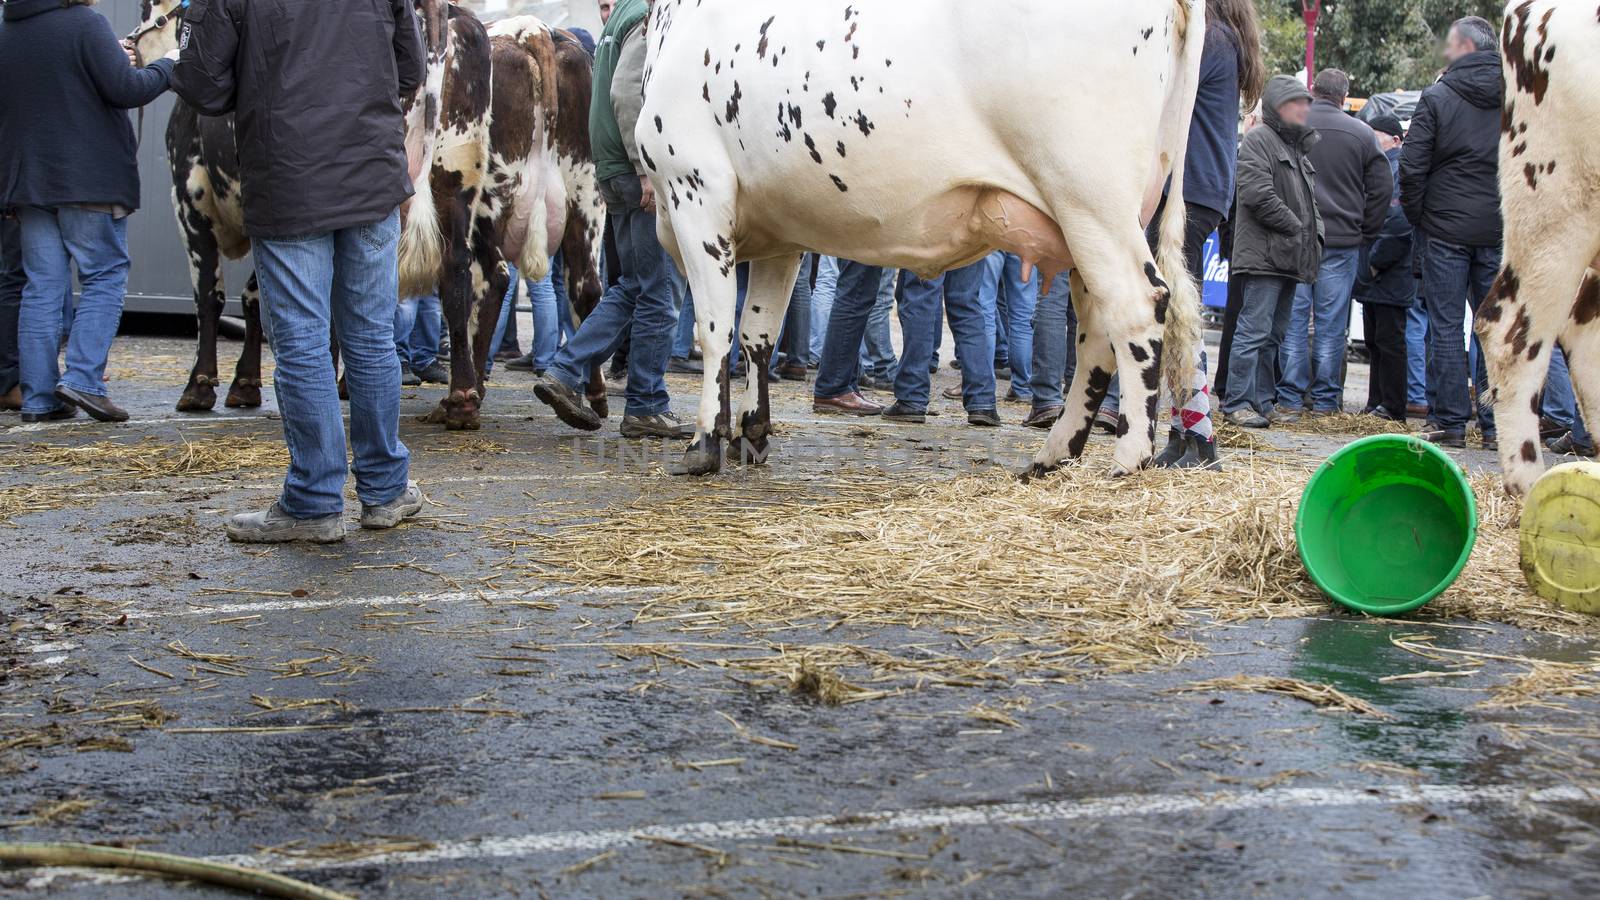 France, farmers rally in january 2016, crisis, anger about common agricultural policy